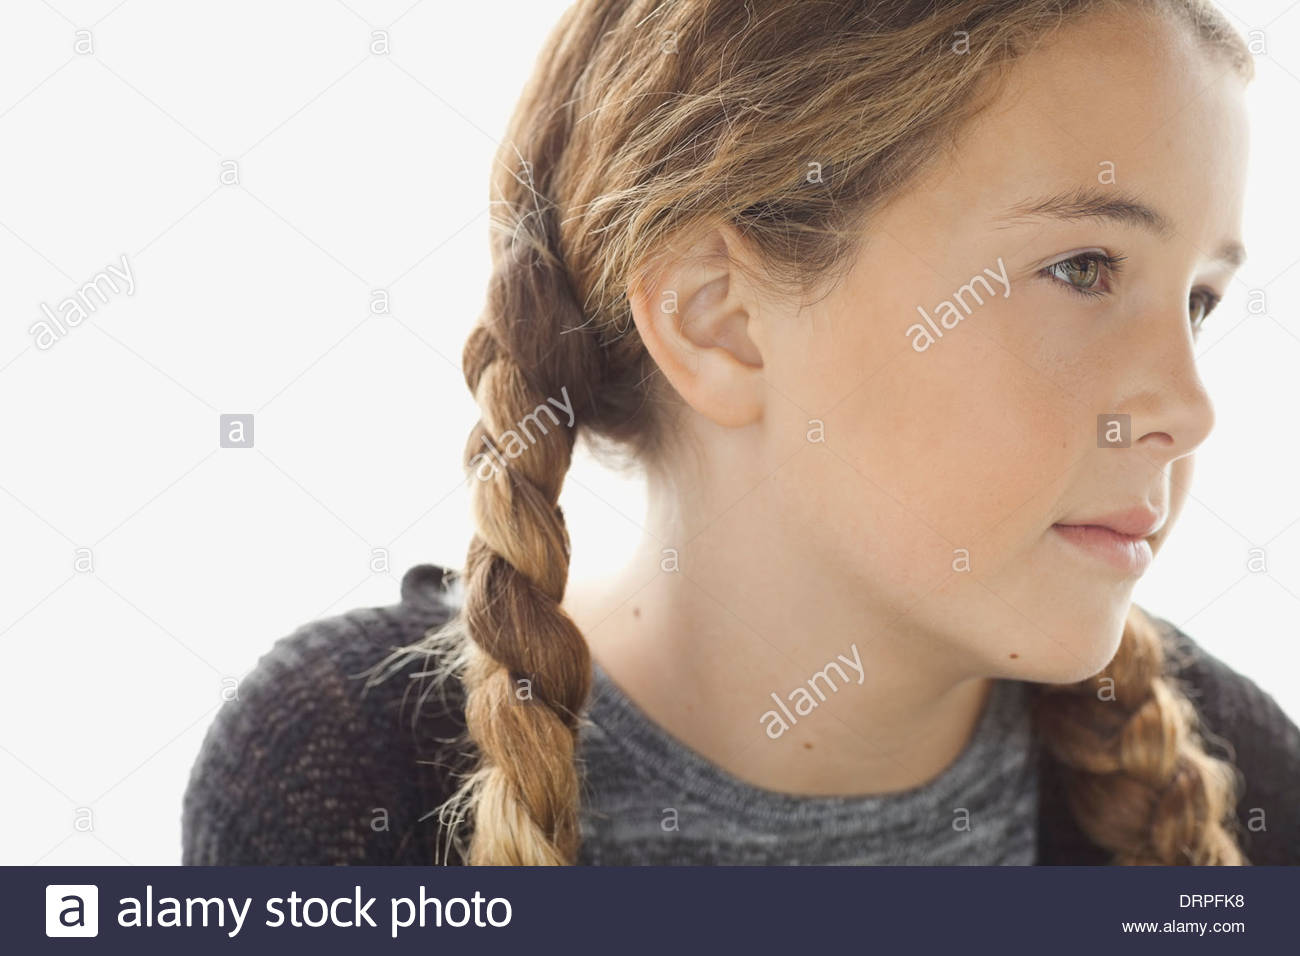 Close-up portrait of girl looking away Banque D'Images